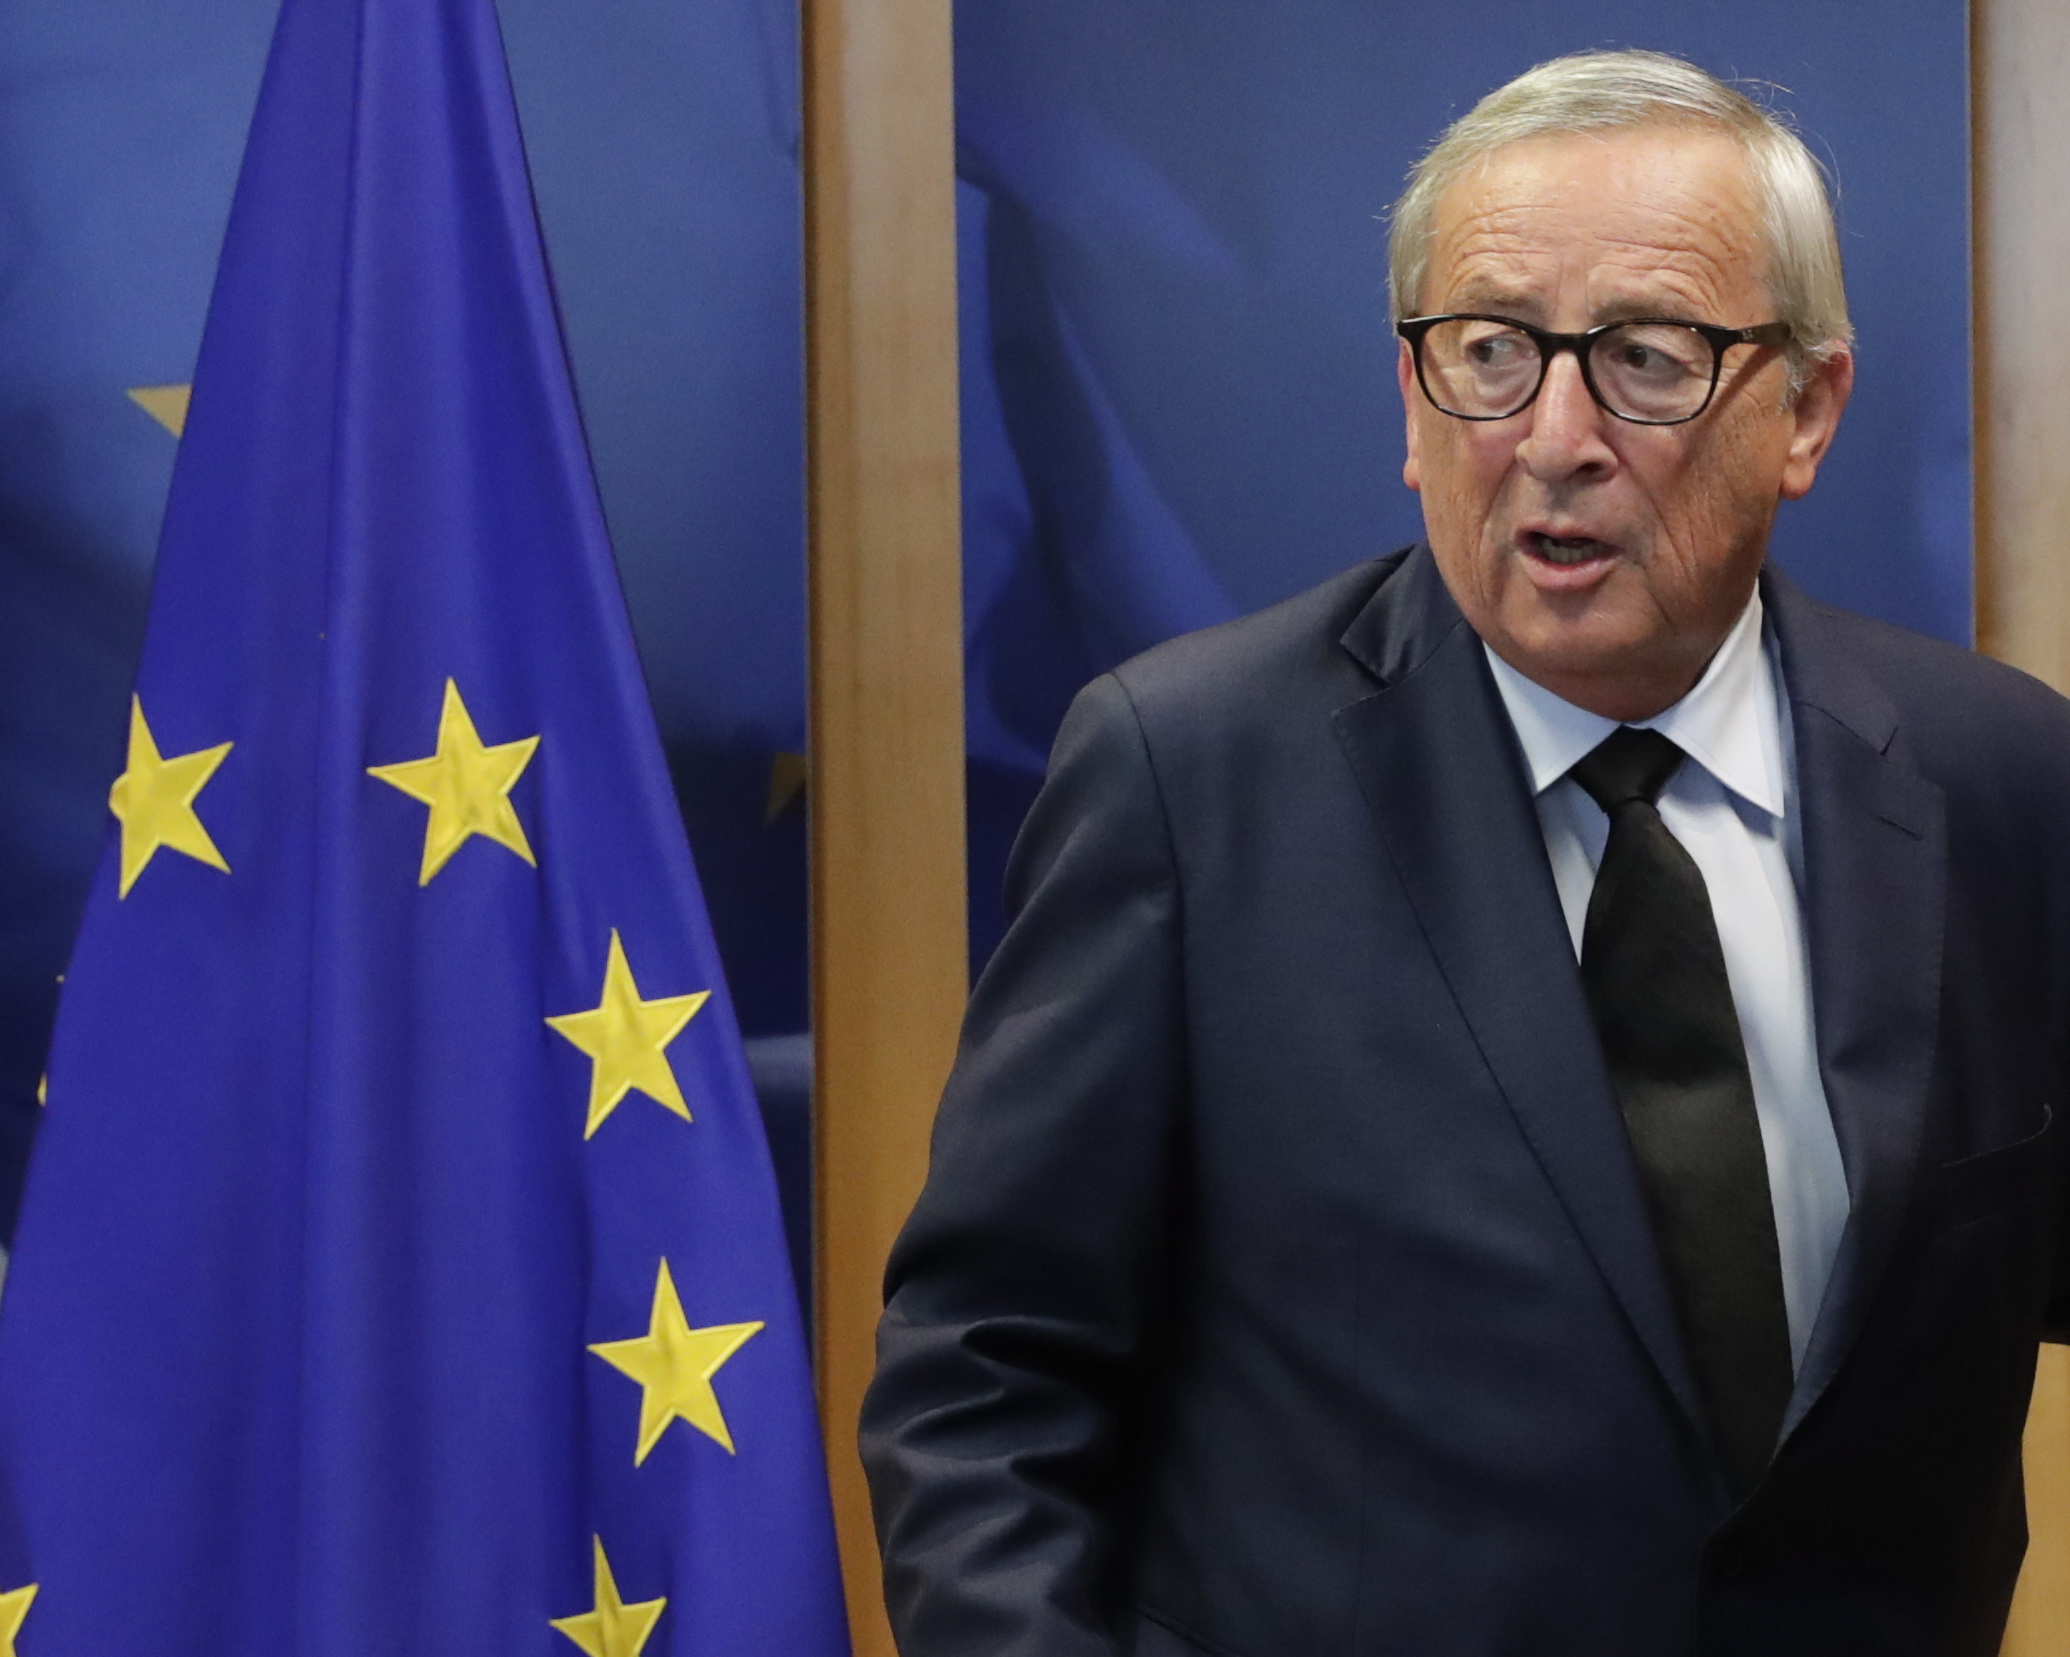 epa07871314 European Commission President Jean Claude Juncker wears a black tie to pay tribute to the late French former president Jacques Chirac prior to a meeting in Brussels, Belgium, 26 September 2019.  EPA/OLIVIER HOSLET